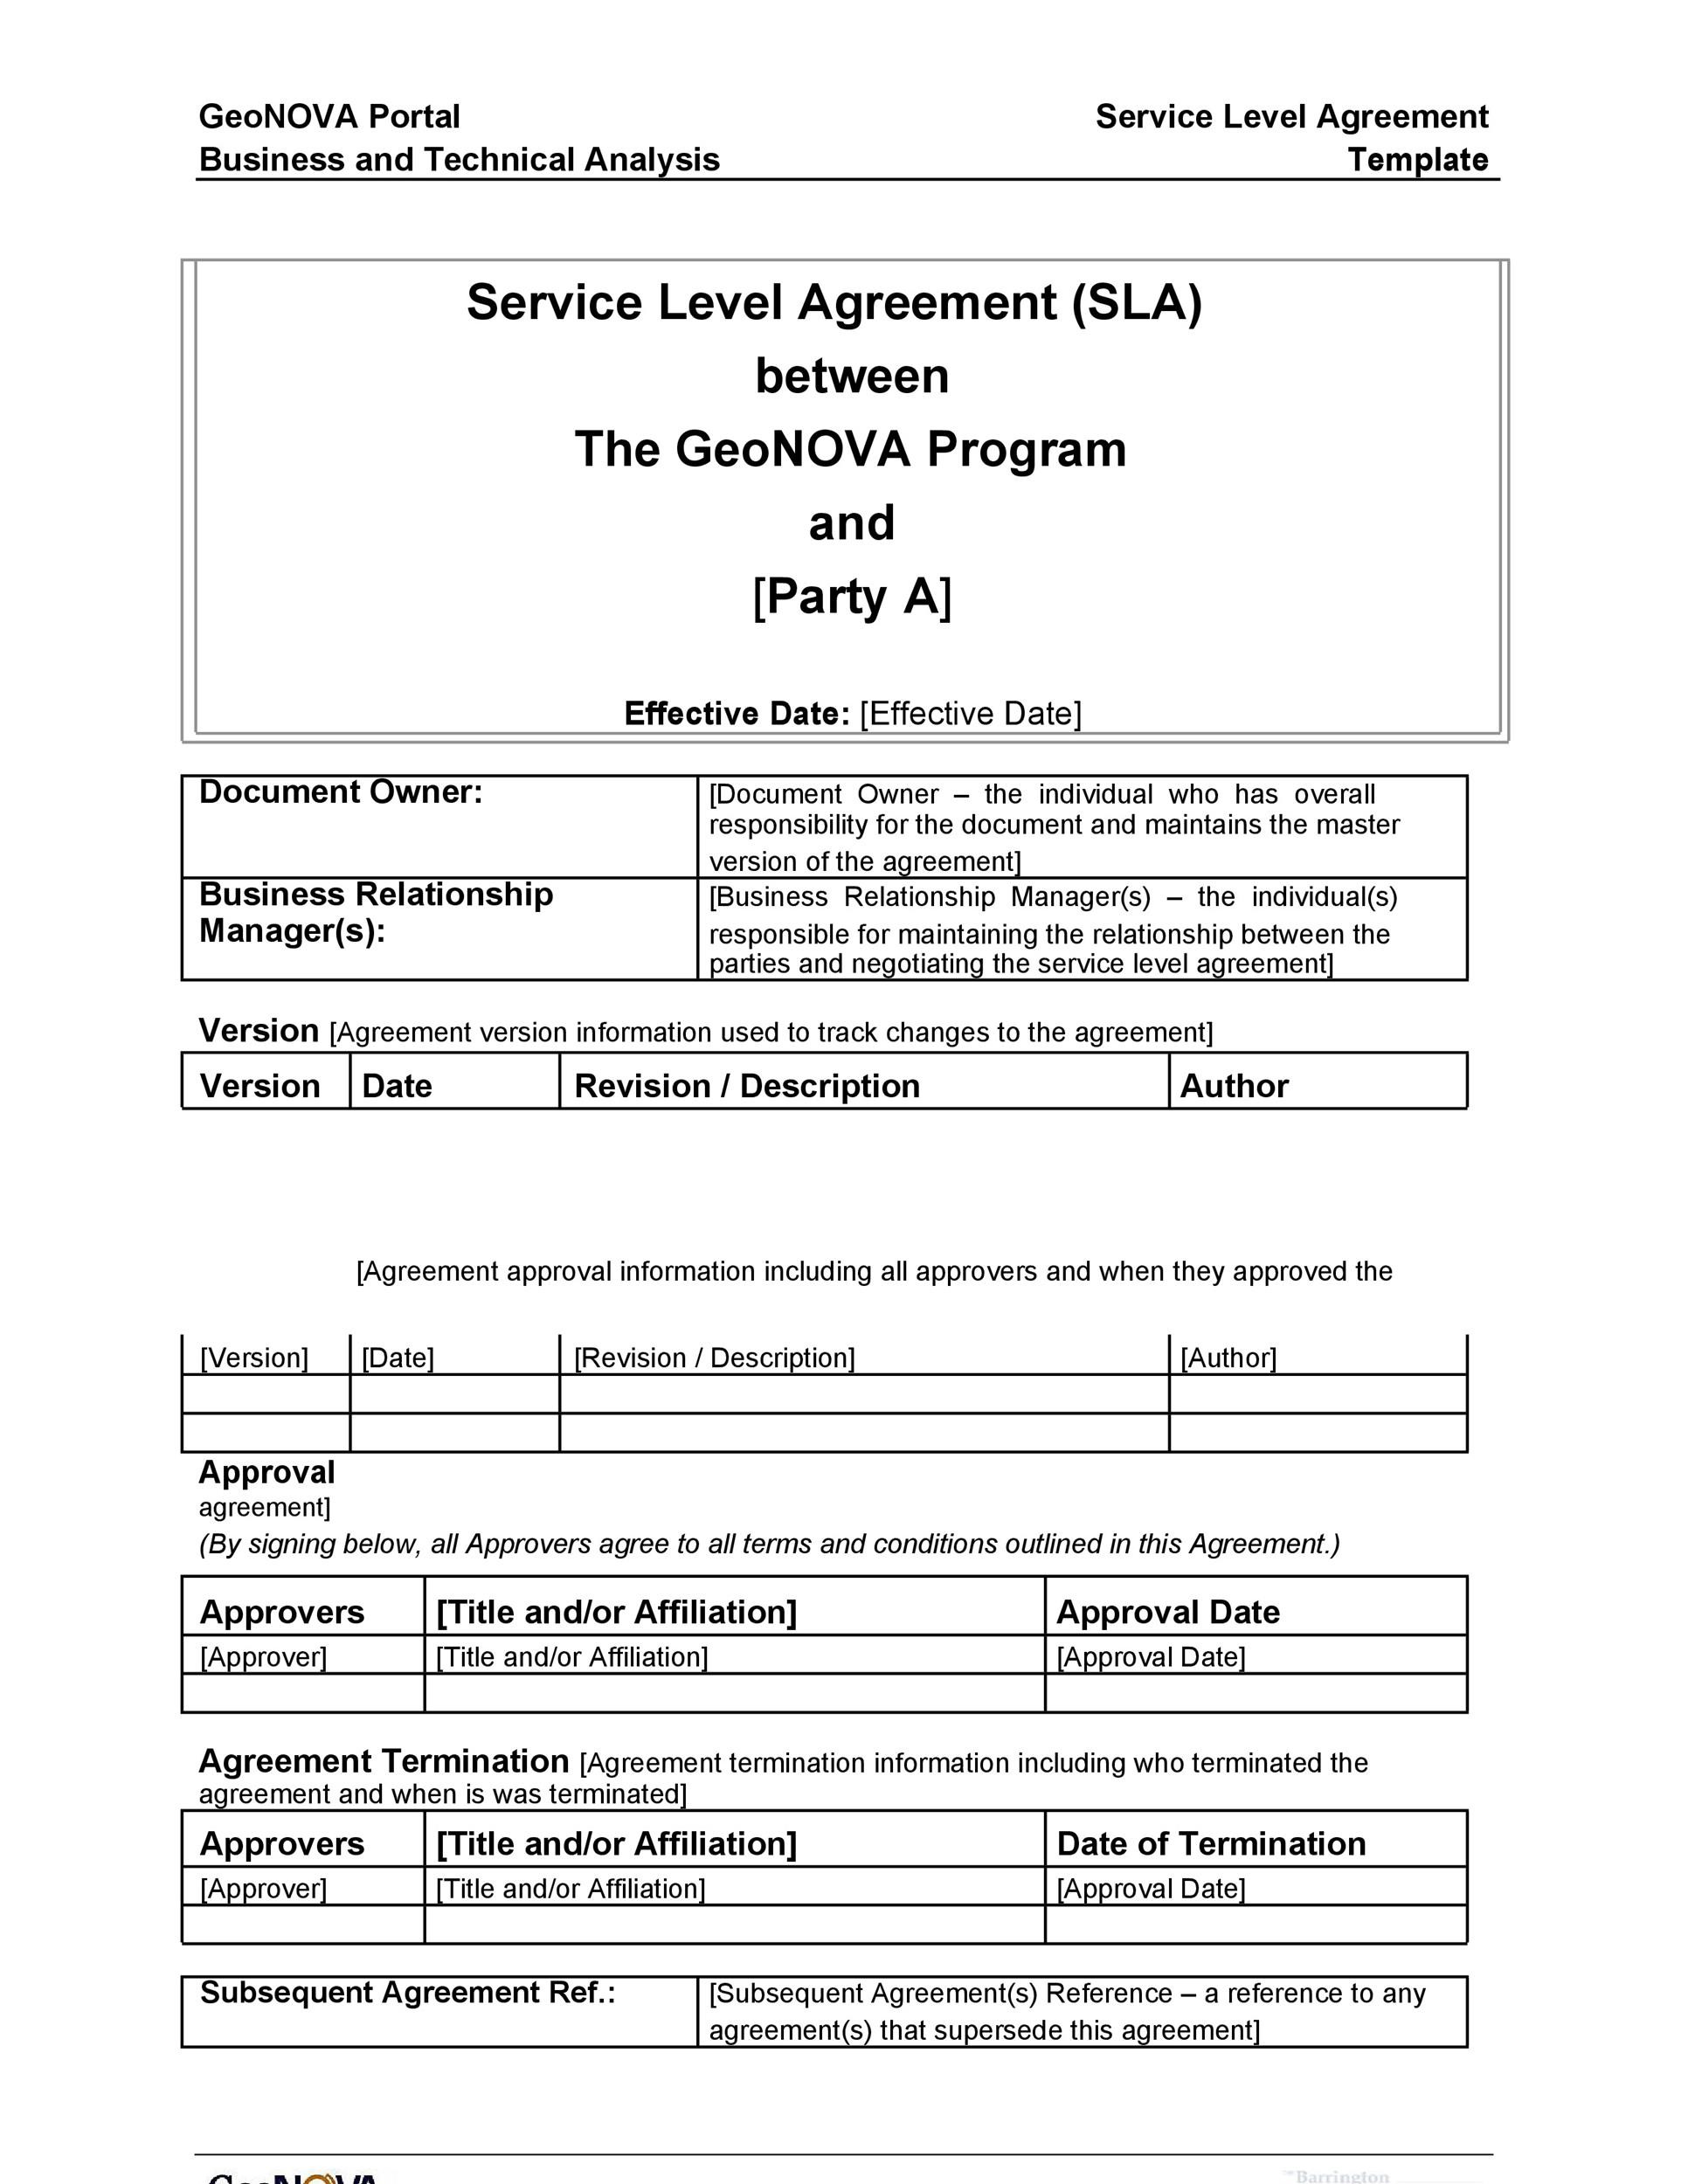 50-professional-service-agreement-templates-contracts